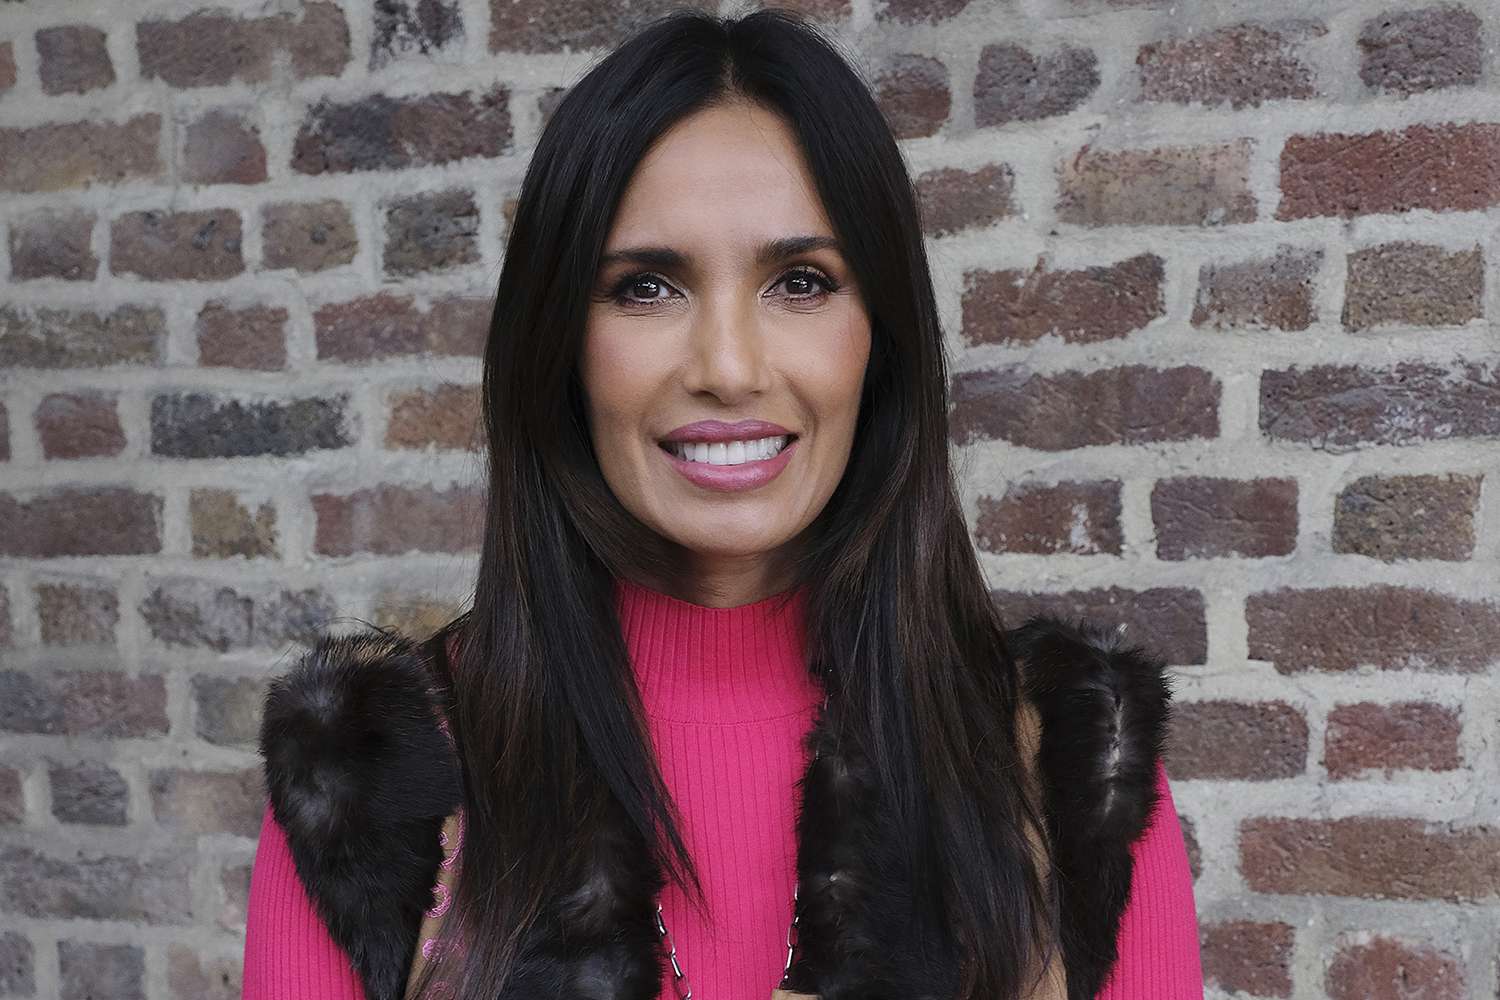 Padma Lakshmi Shares Her Approach to Health: 'I Try to Be Kind to My Body'